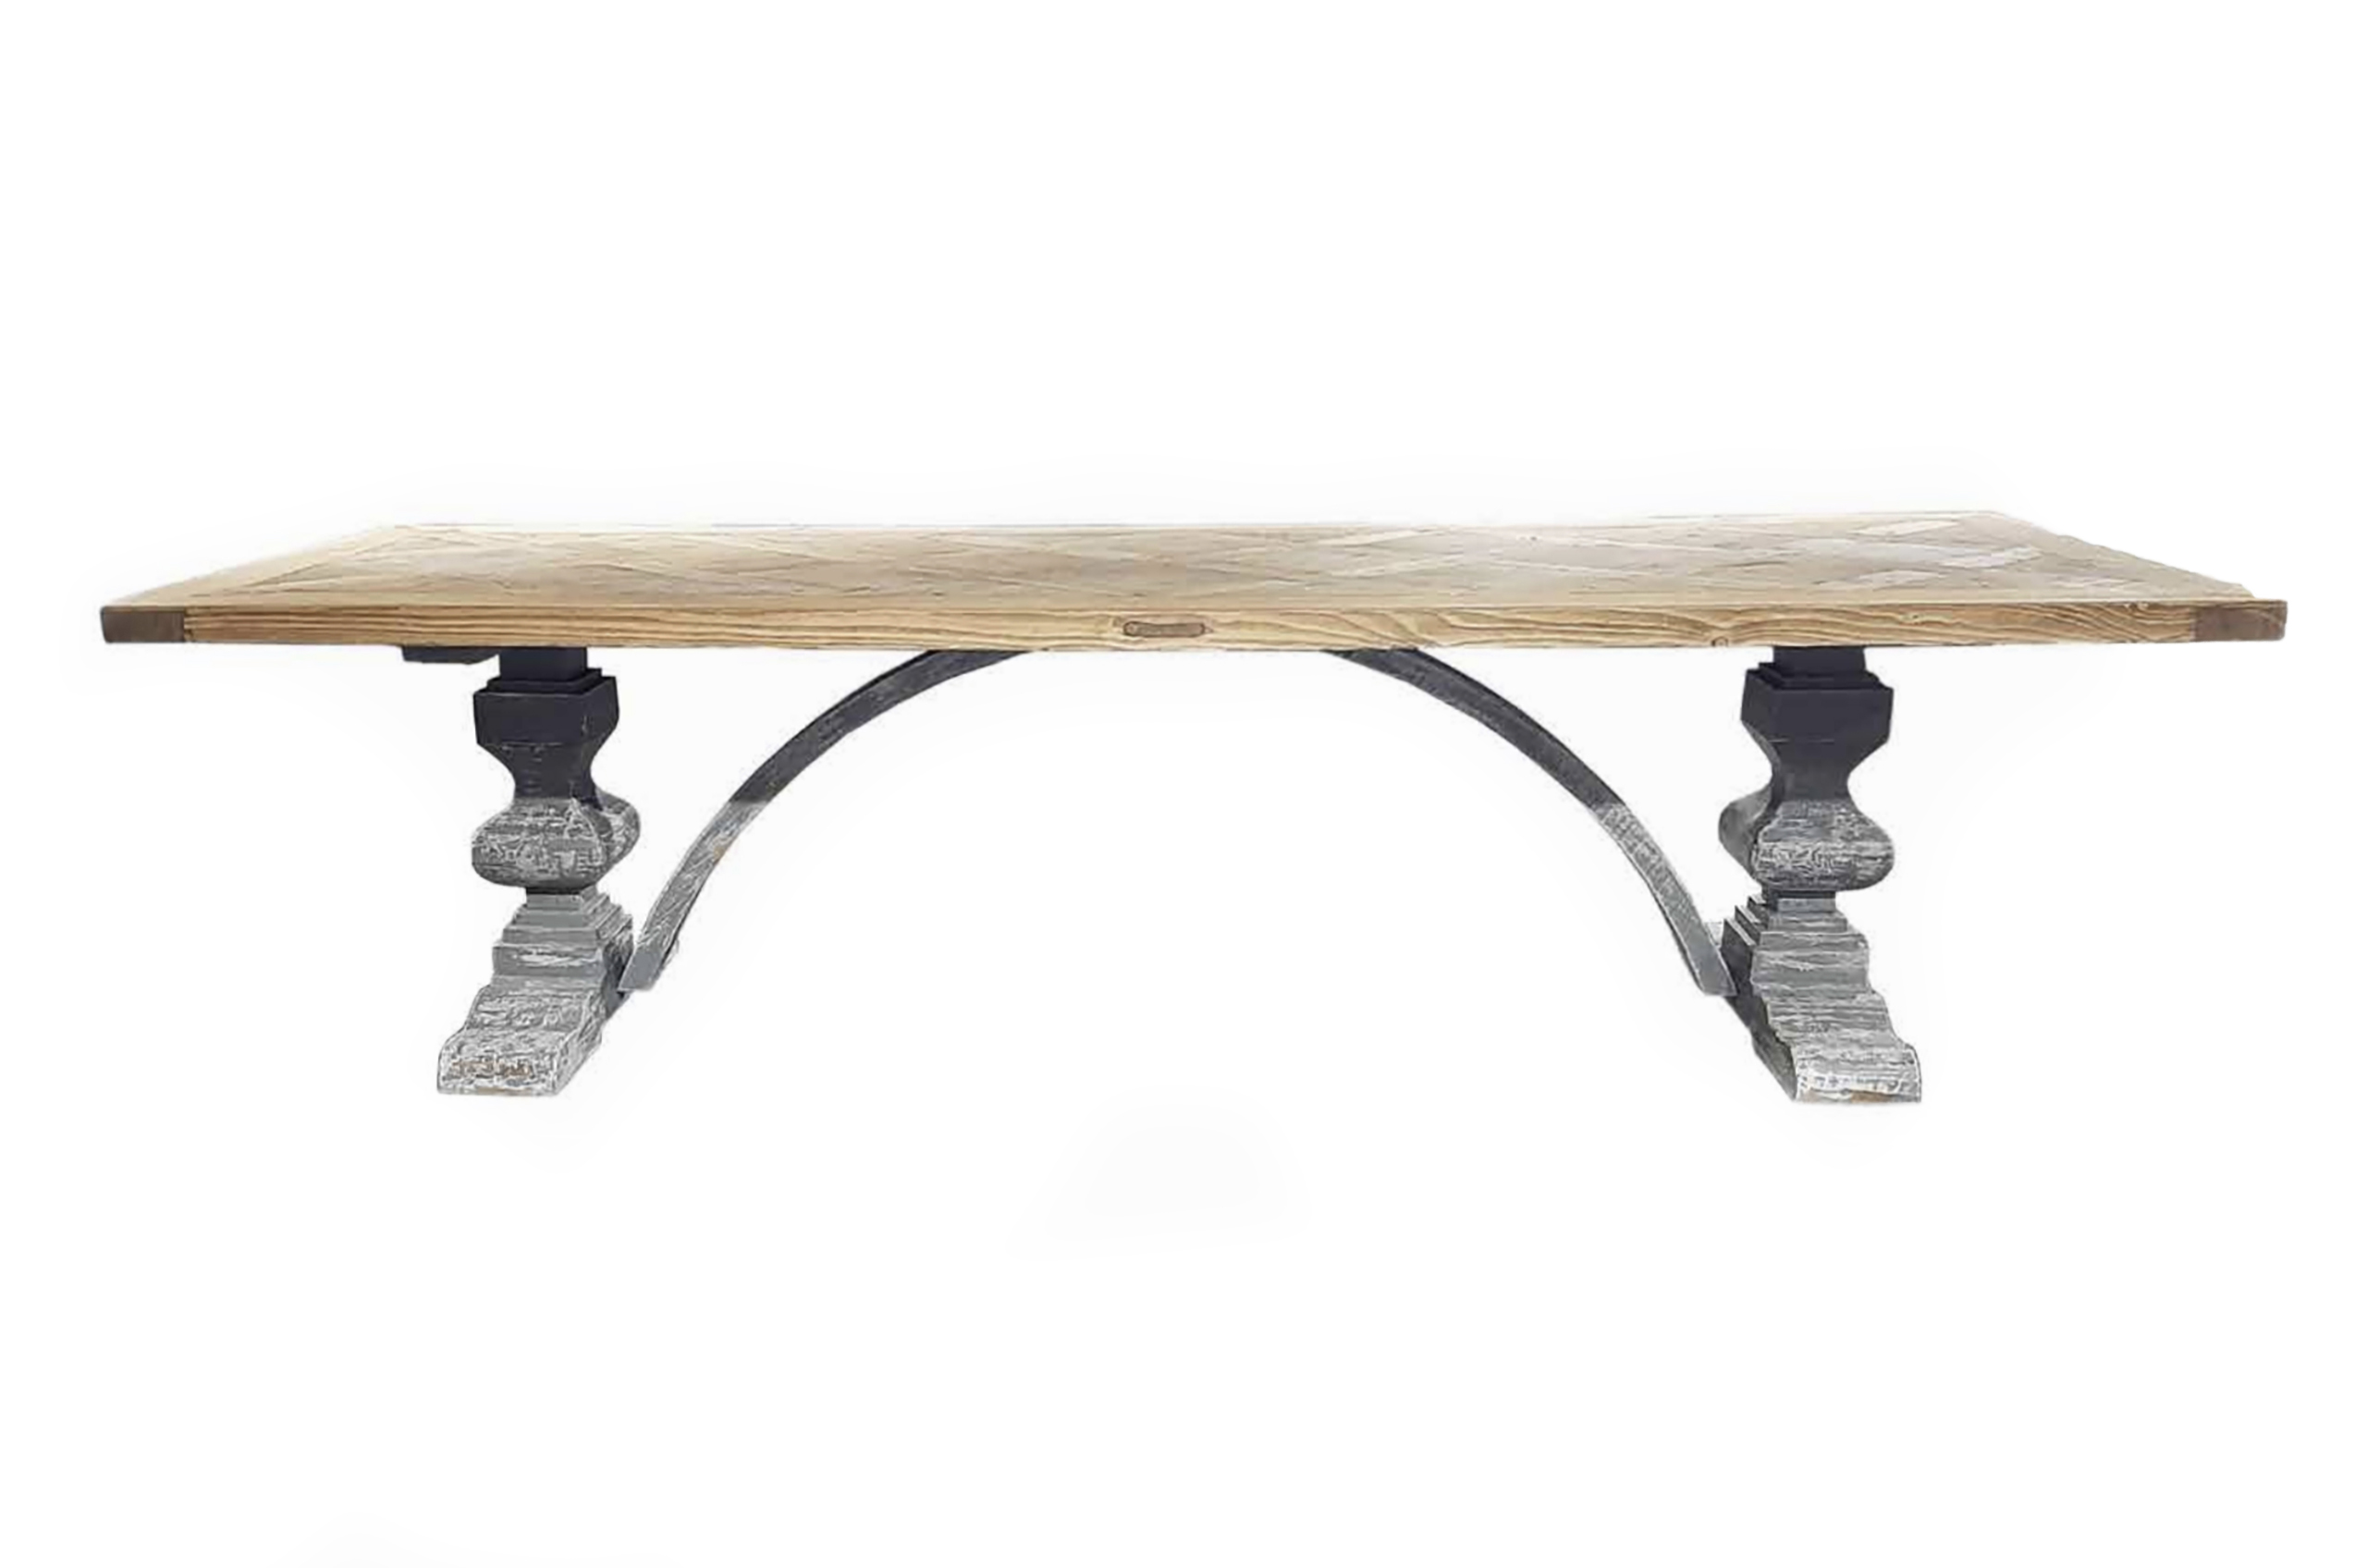 T2181 Only available in lengths of 99" or 114" due to table top design. Shown with Coastal Sands Stained Top and Weathered Gray Base. Table base with arch is also available in 8', 9', or 10' lengths with framed top.